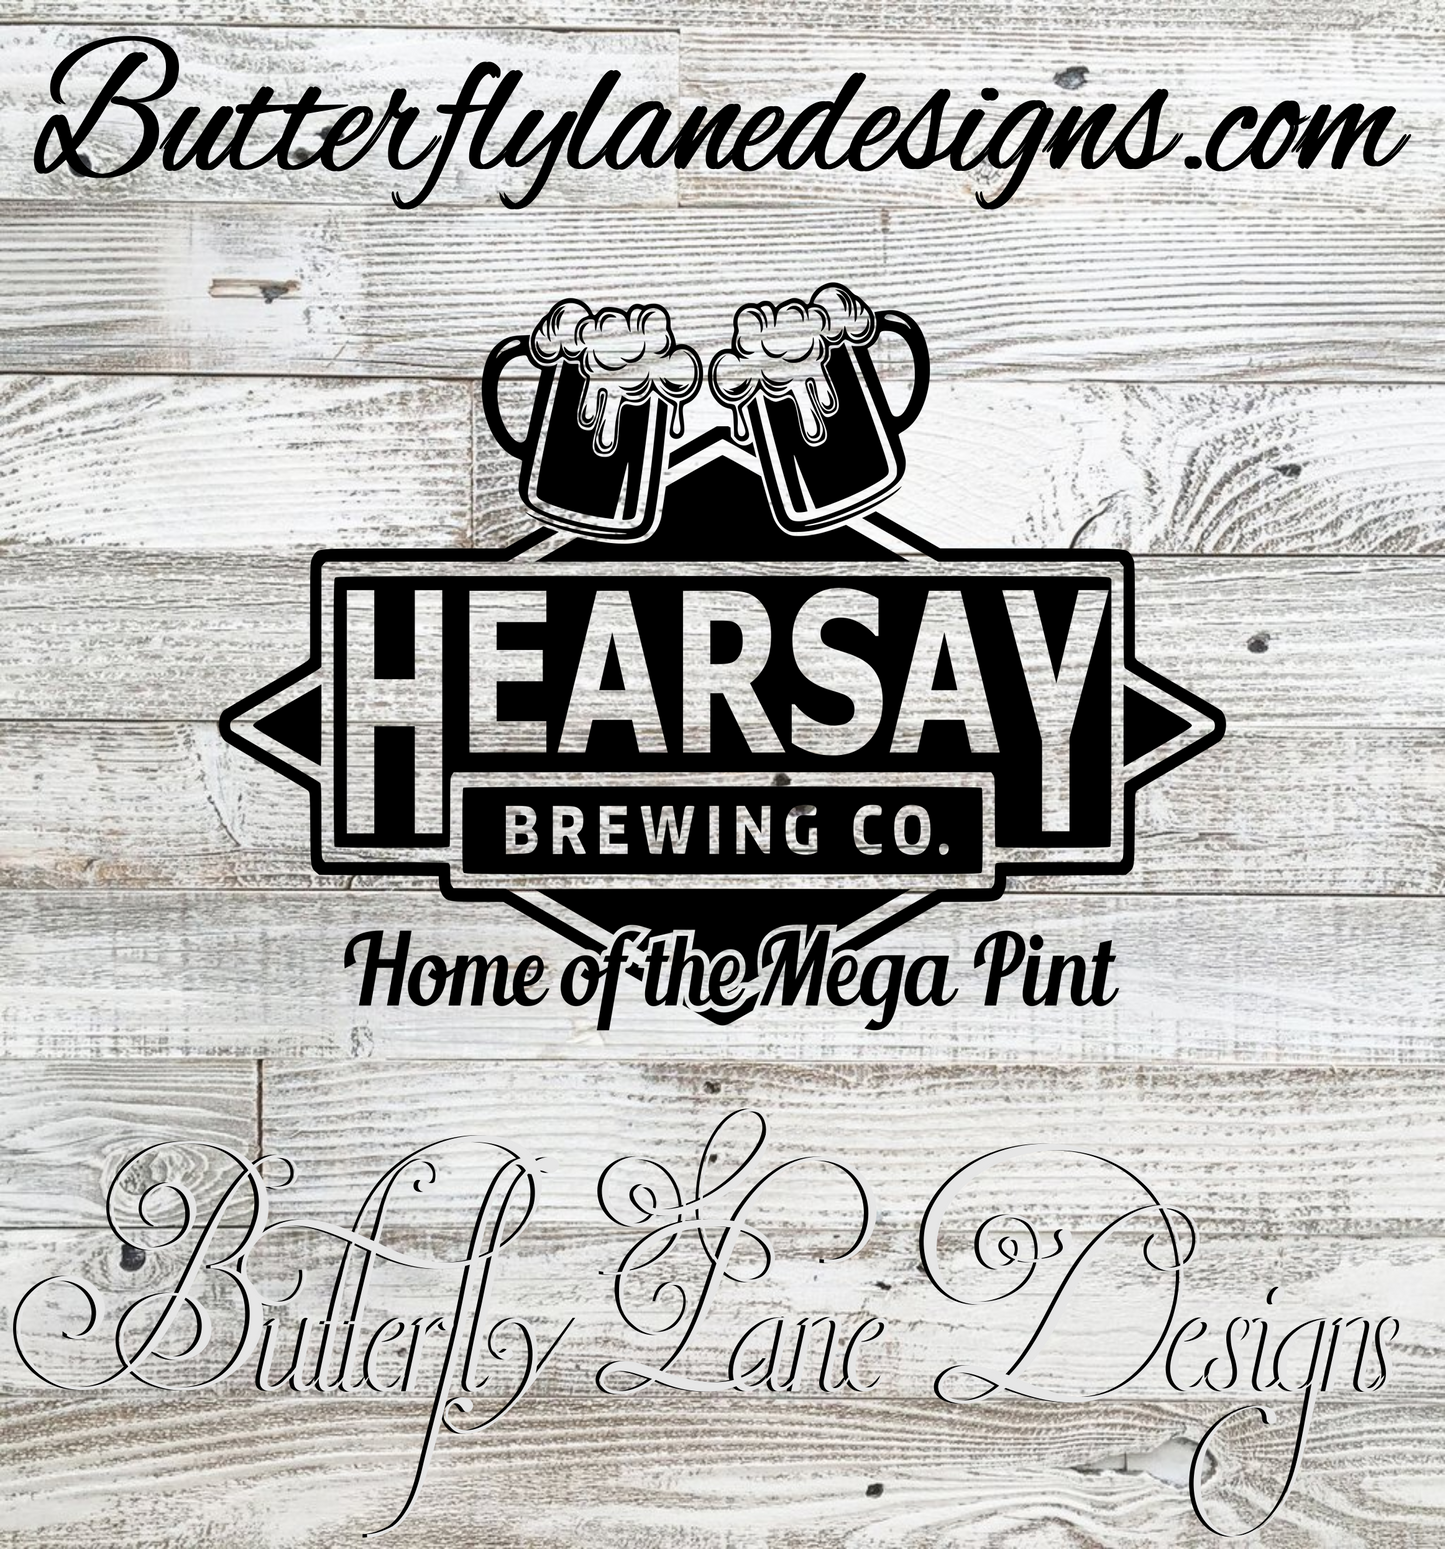 Hearsay-Megapint :: Clear Decal or VC Decal